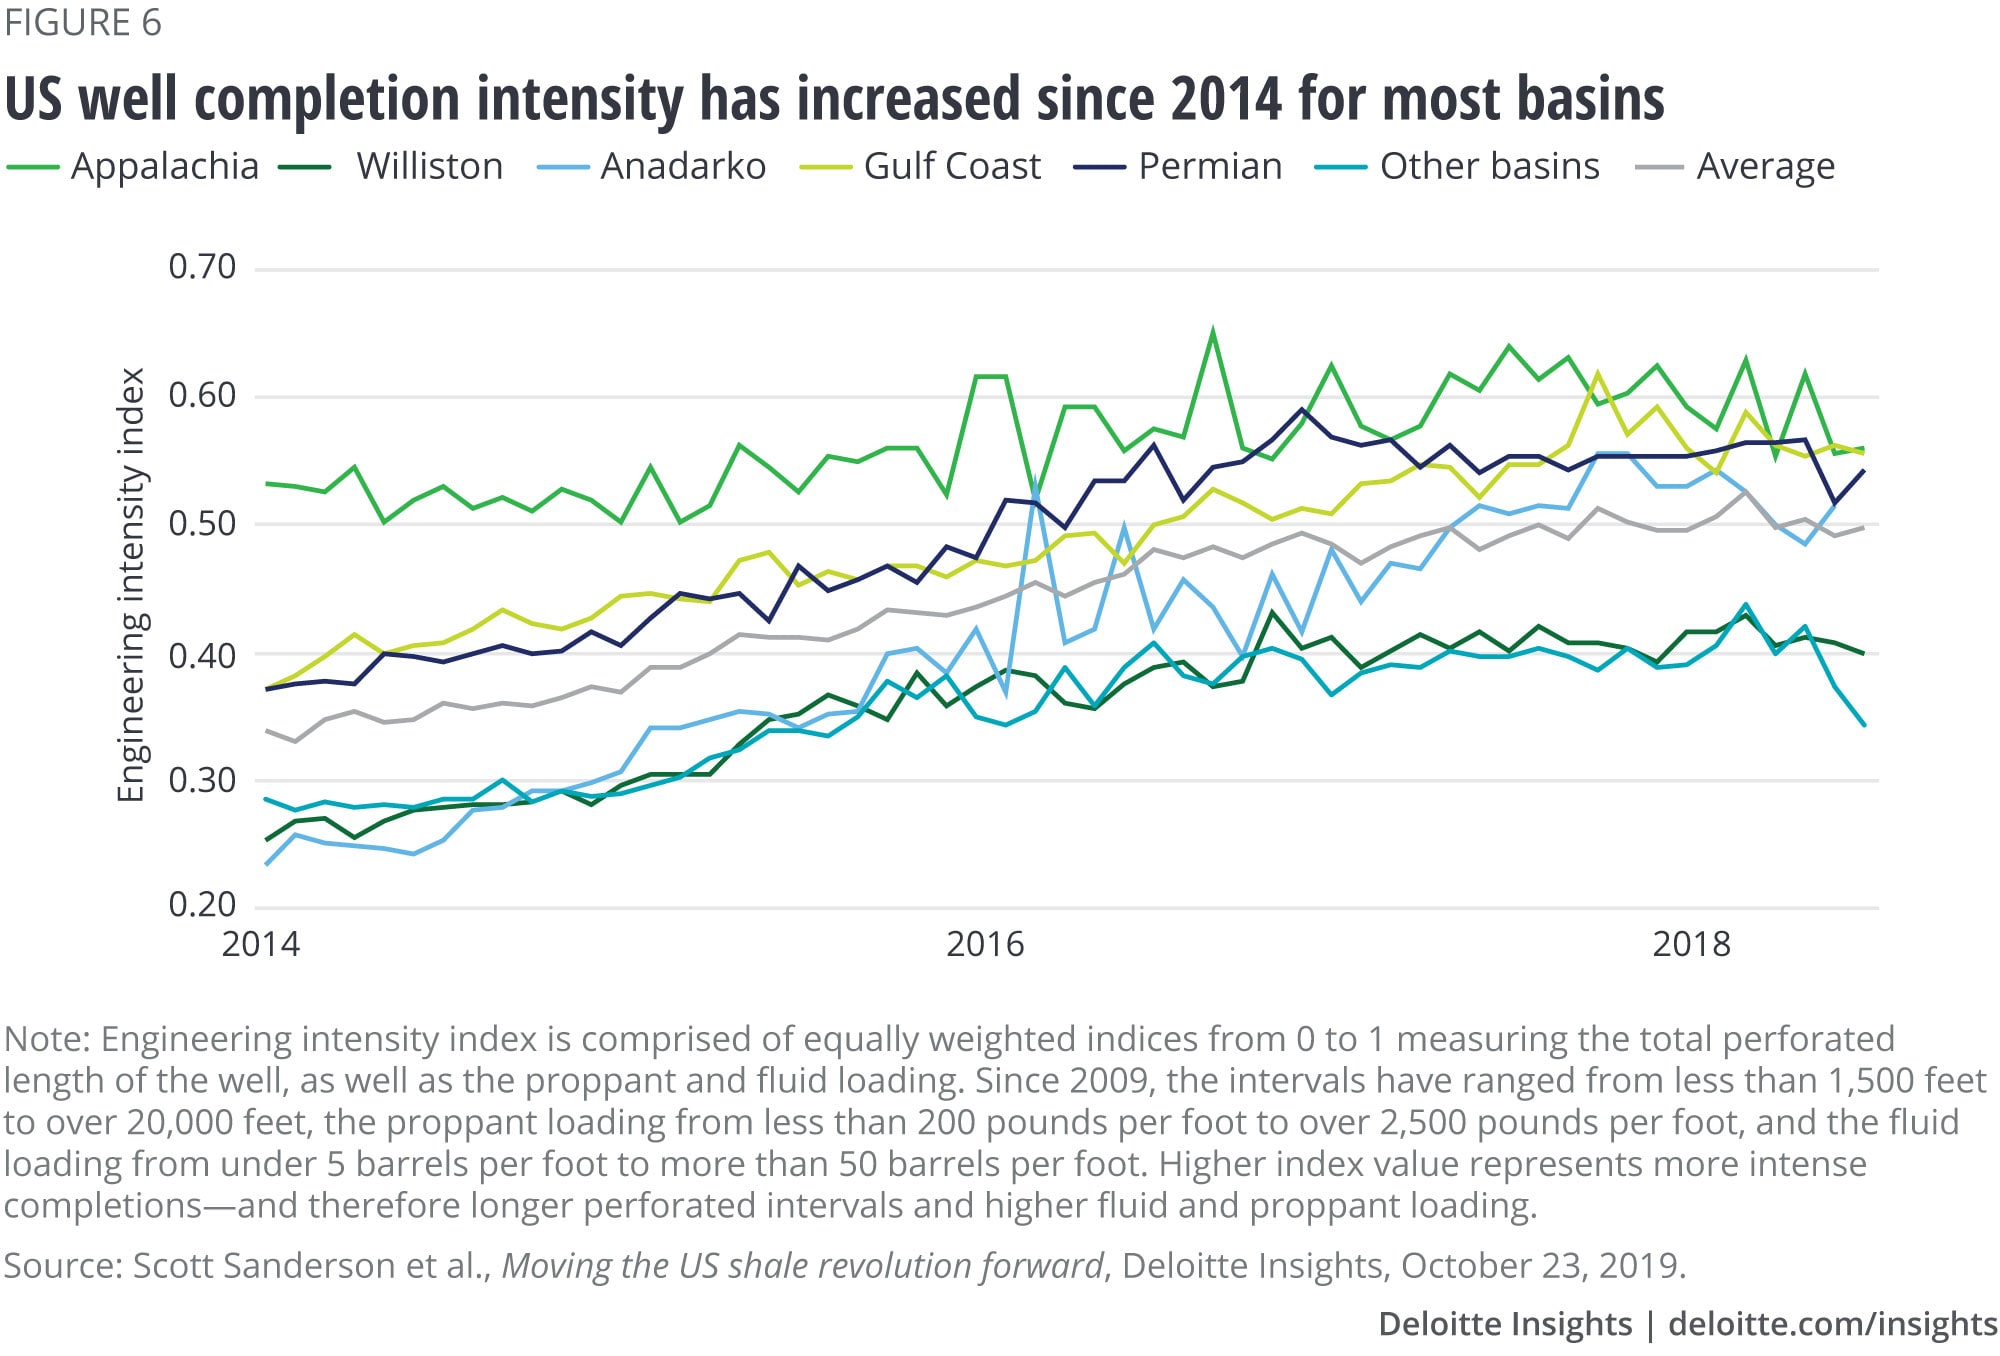 US well completions intensity has increased since 2014 for most basins